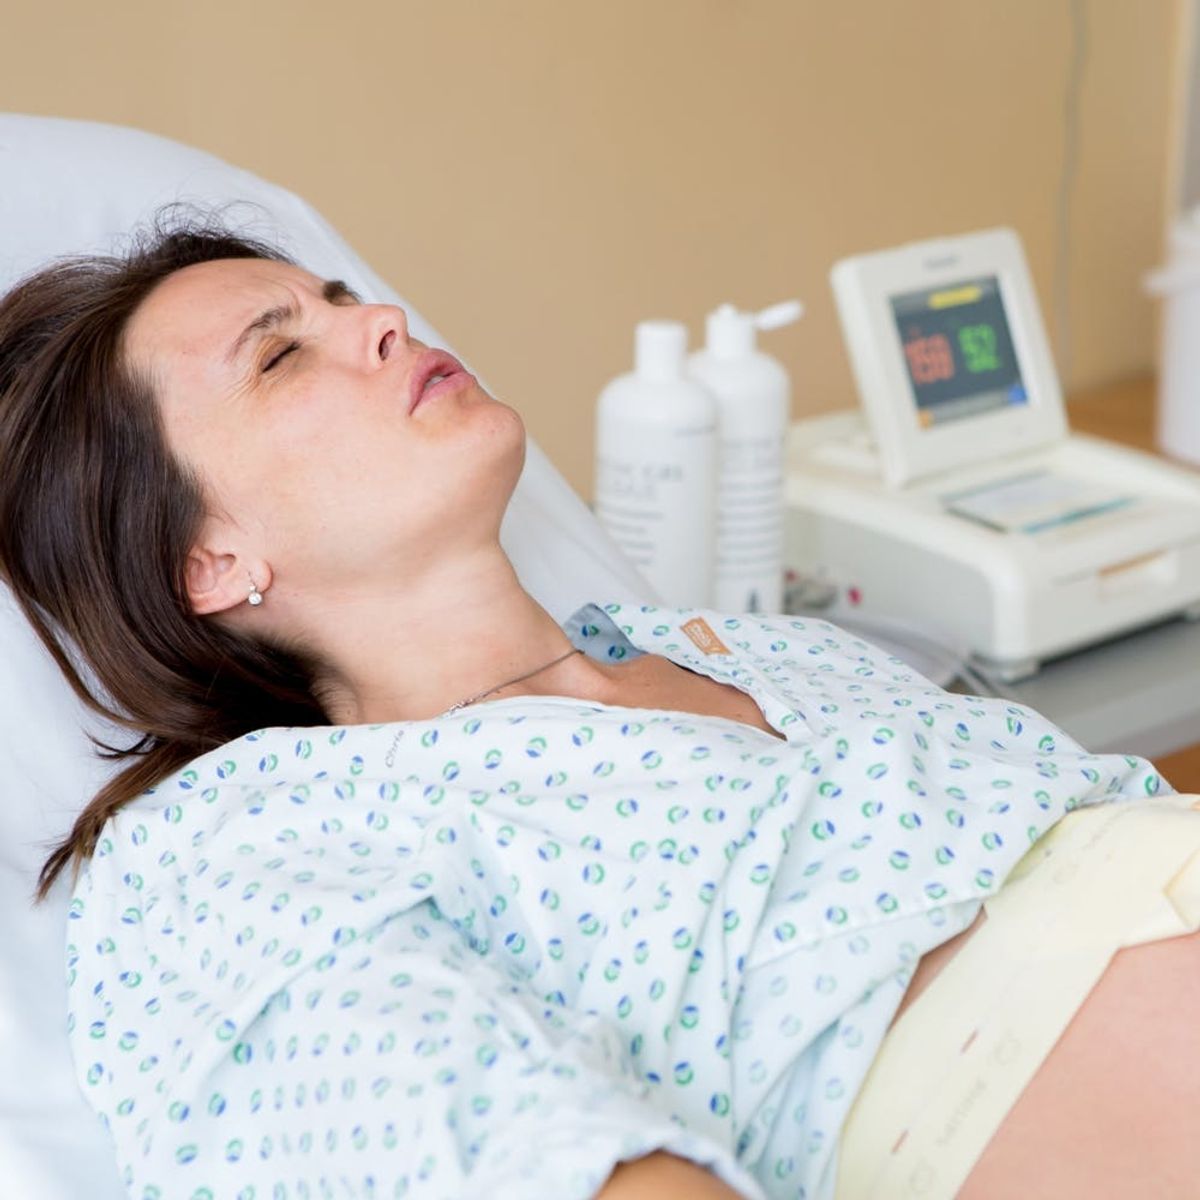 8 Things to Know About Pain Management During Labor